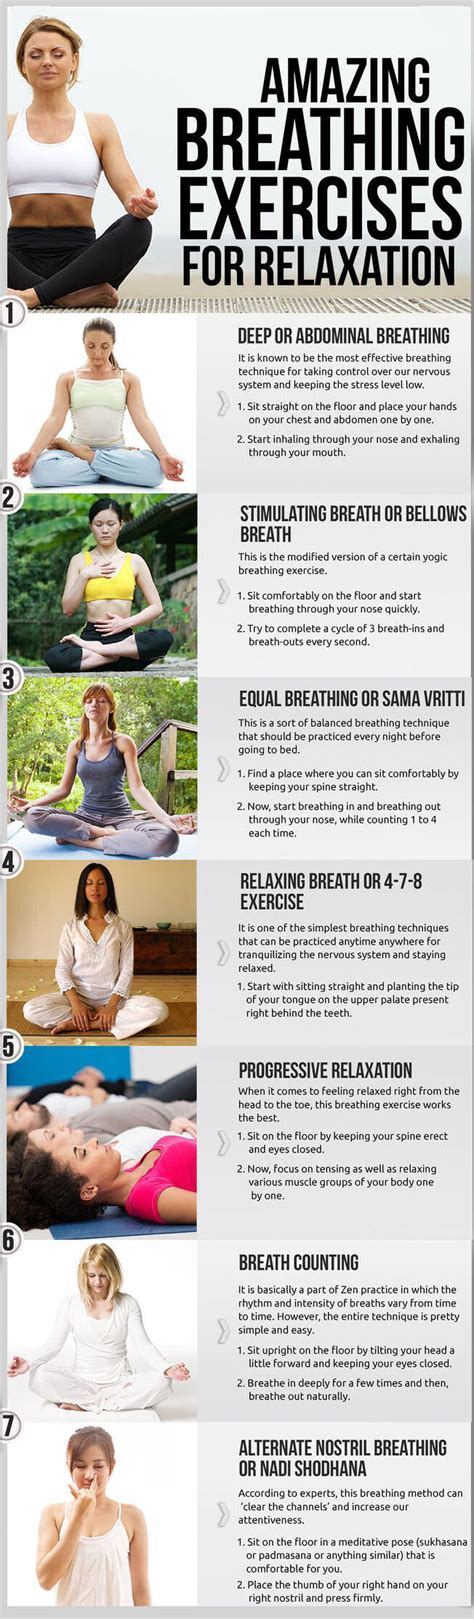 7 Amazing Breathing Exercises For Relaxation Pictures Photos And